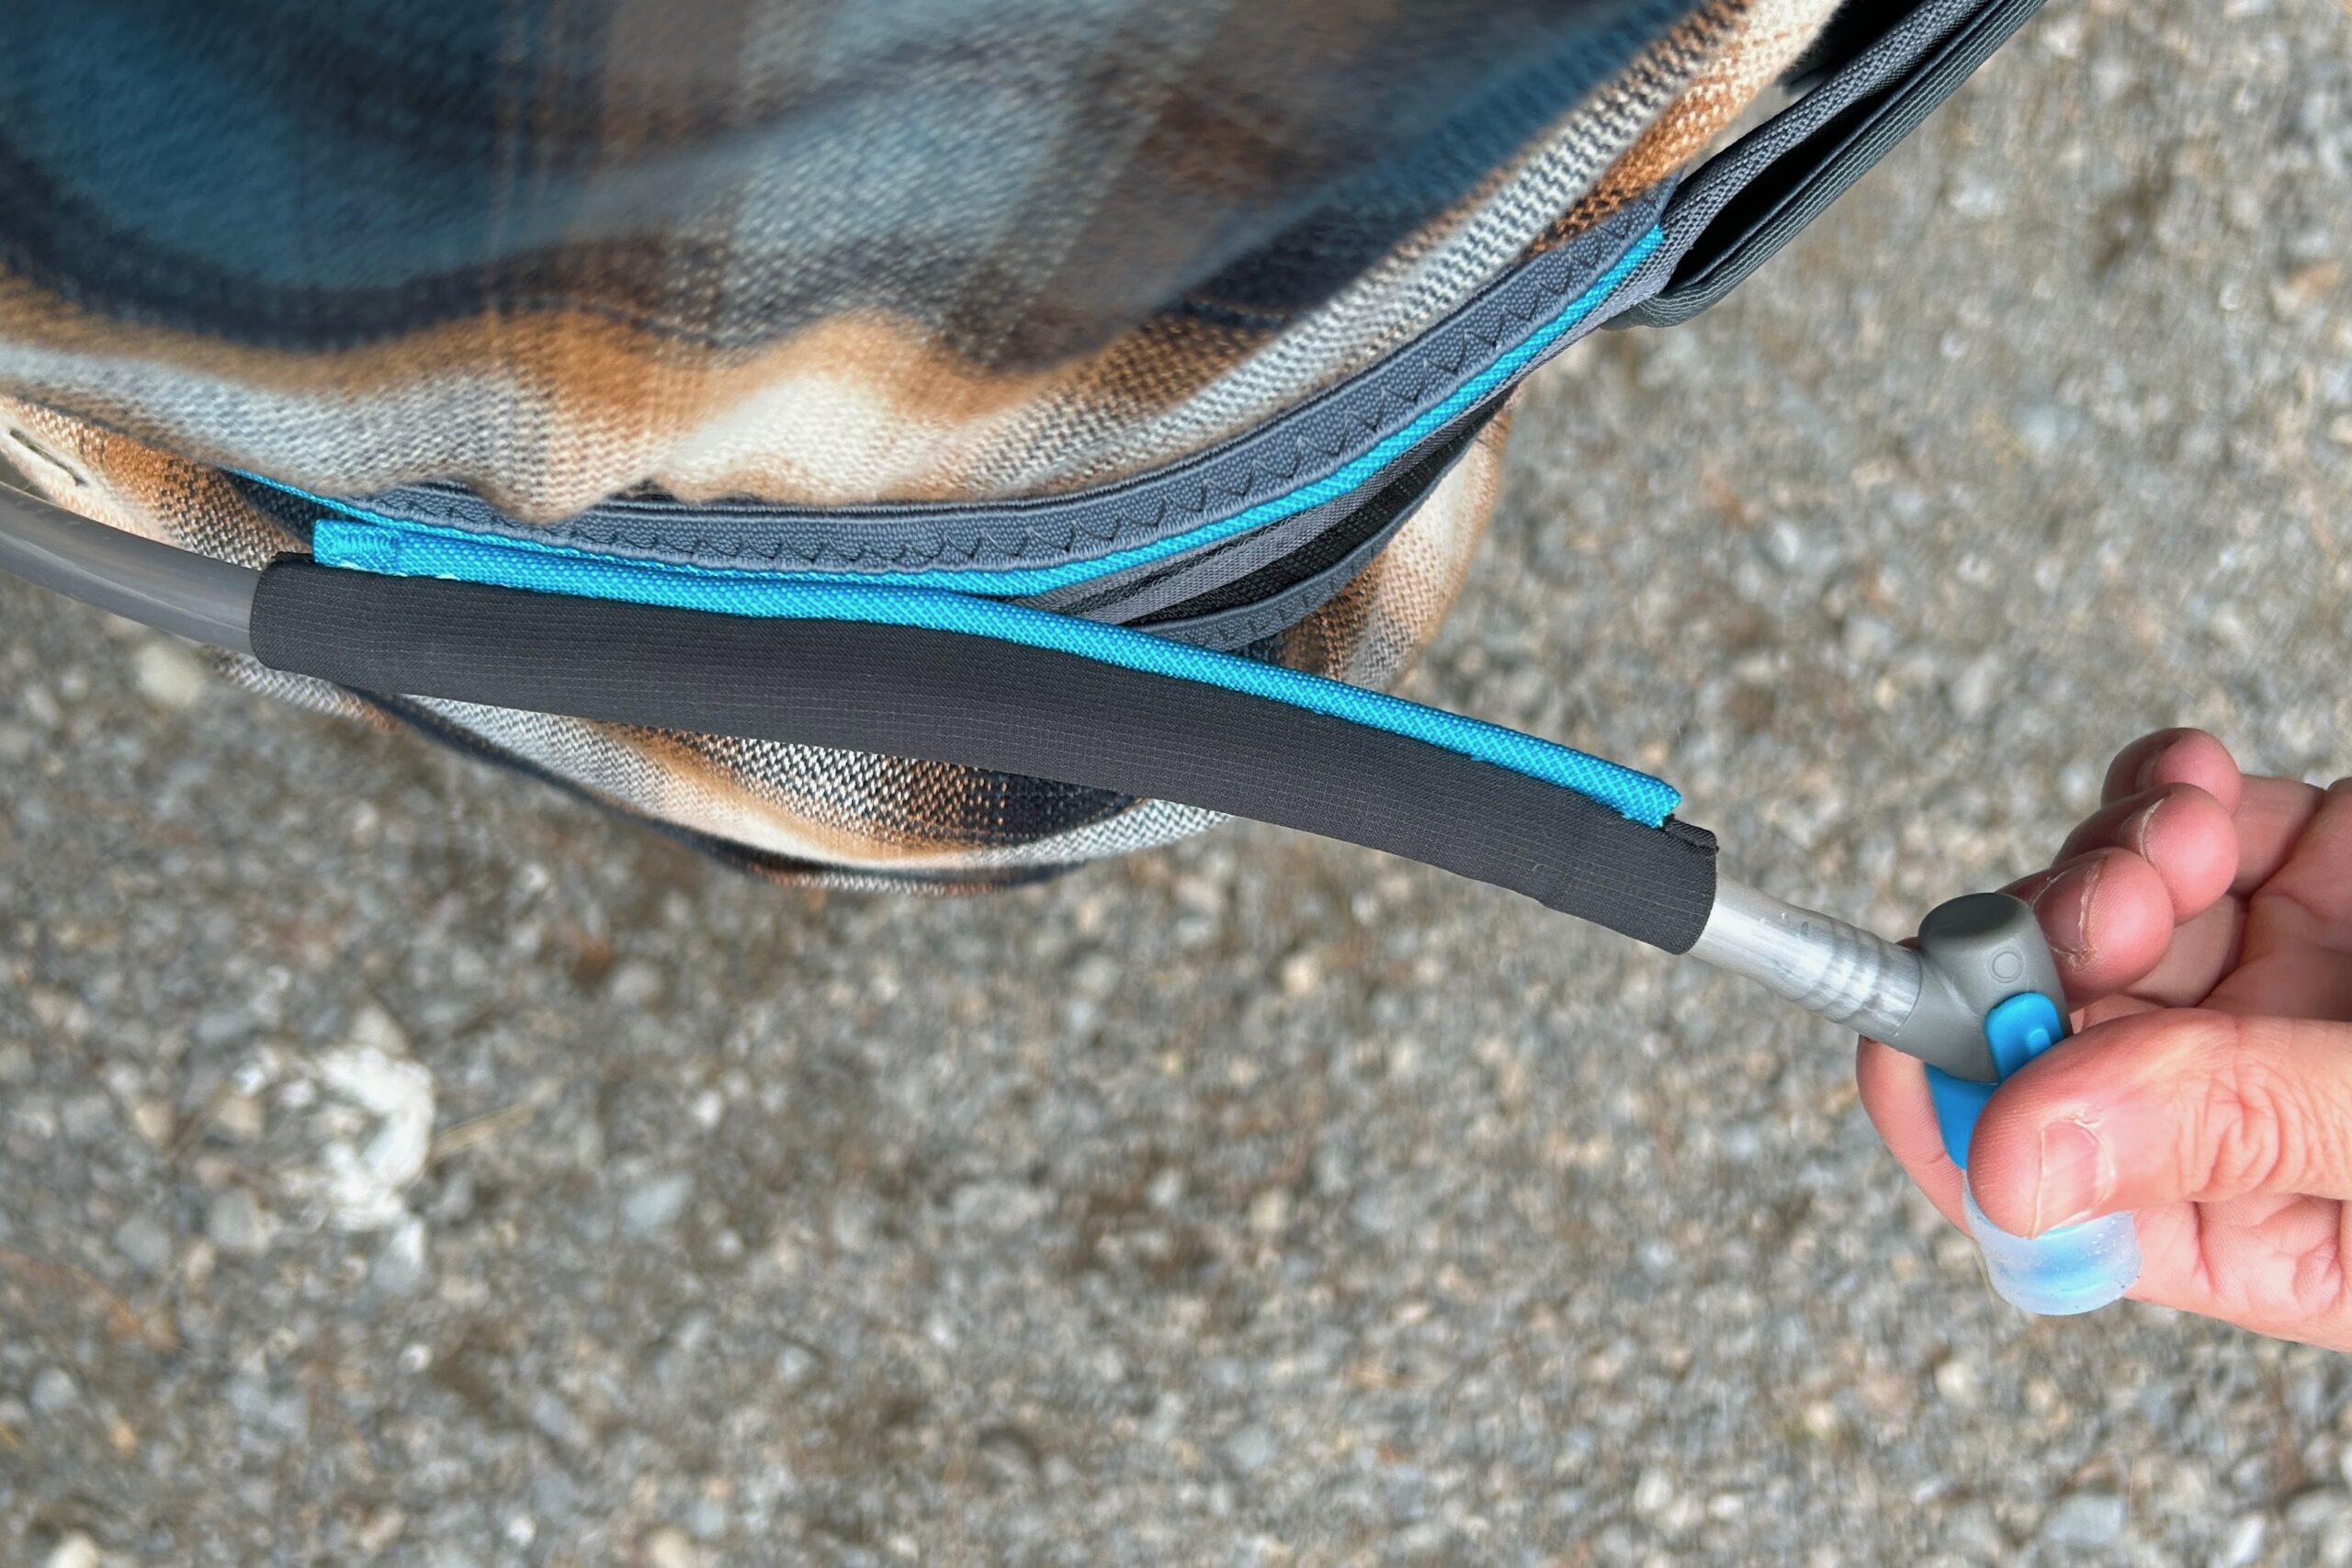 the magnetic hose connection on the Thule Rail 4